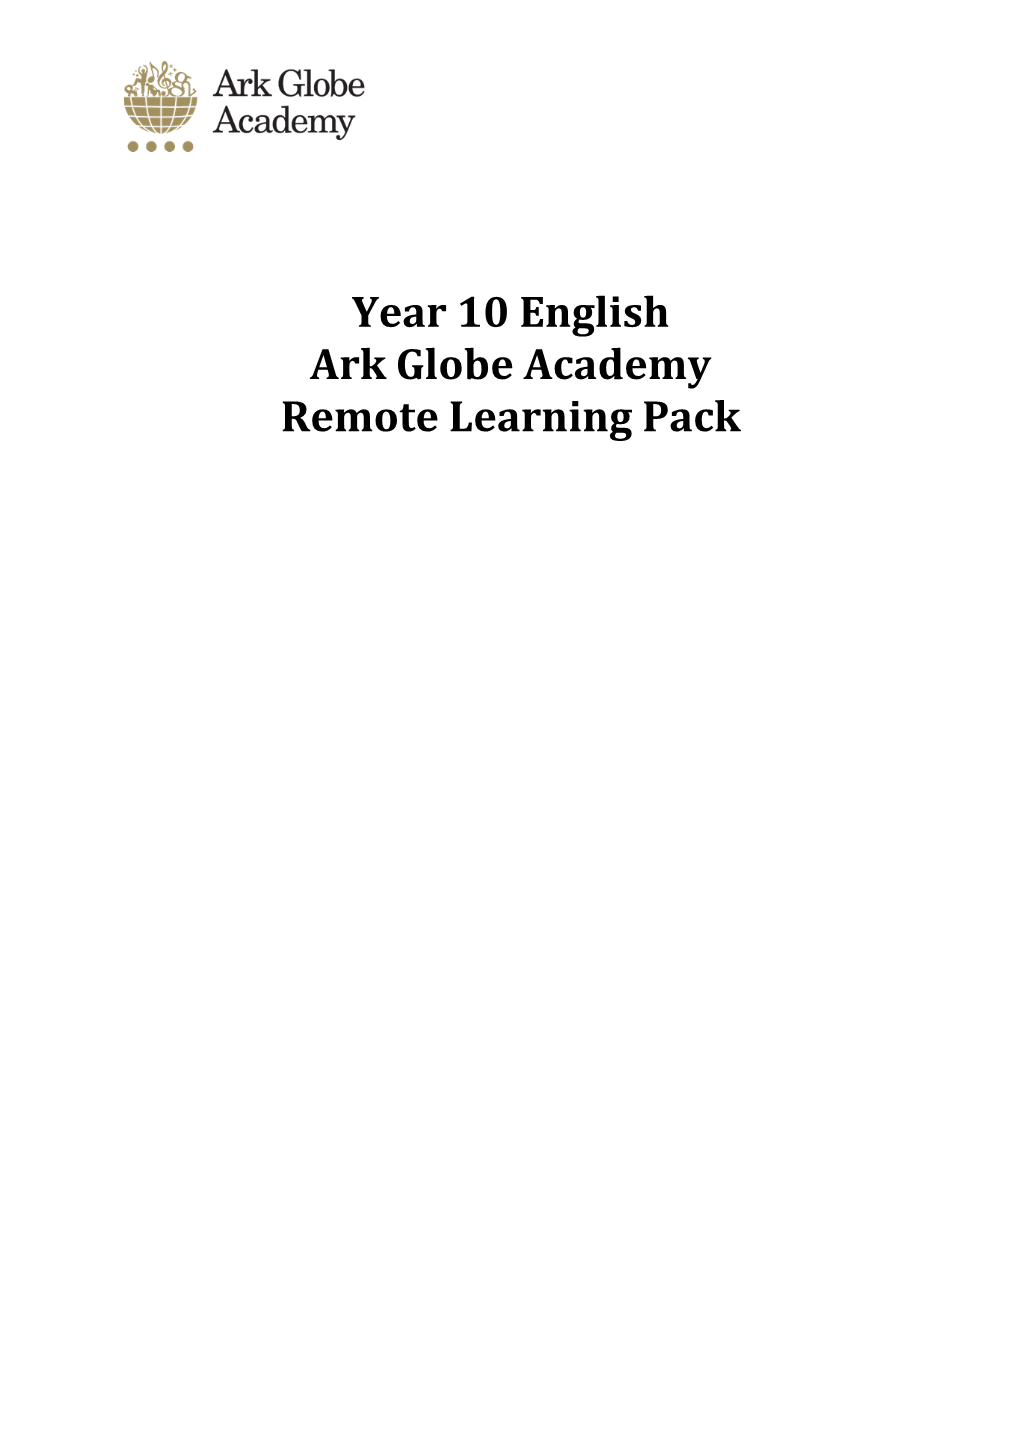 Year 10 English Ark Globe Academy Remote Learning Pack